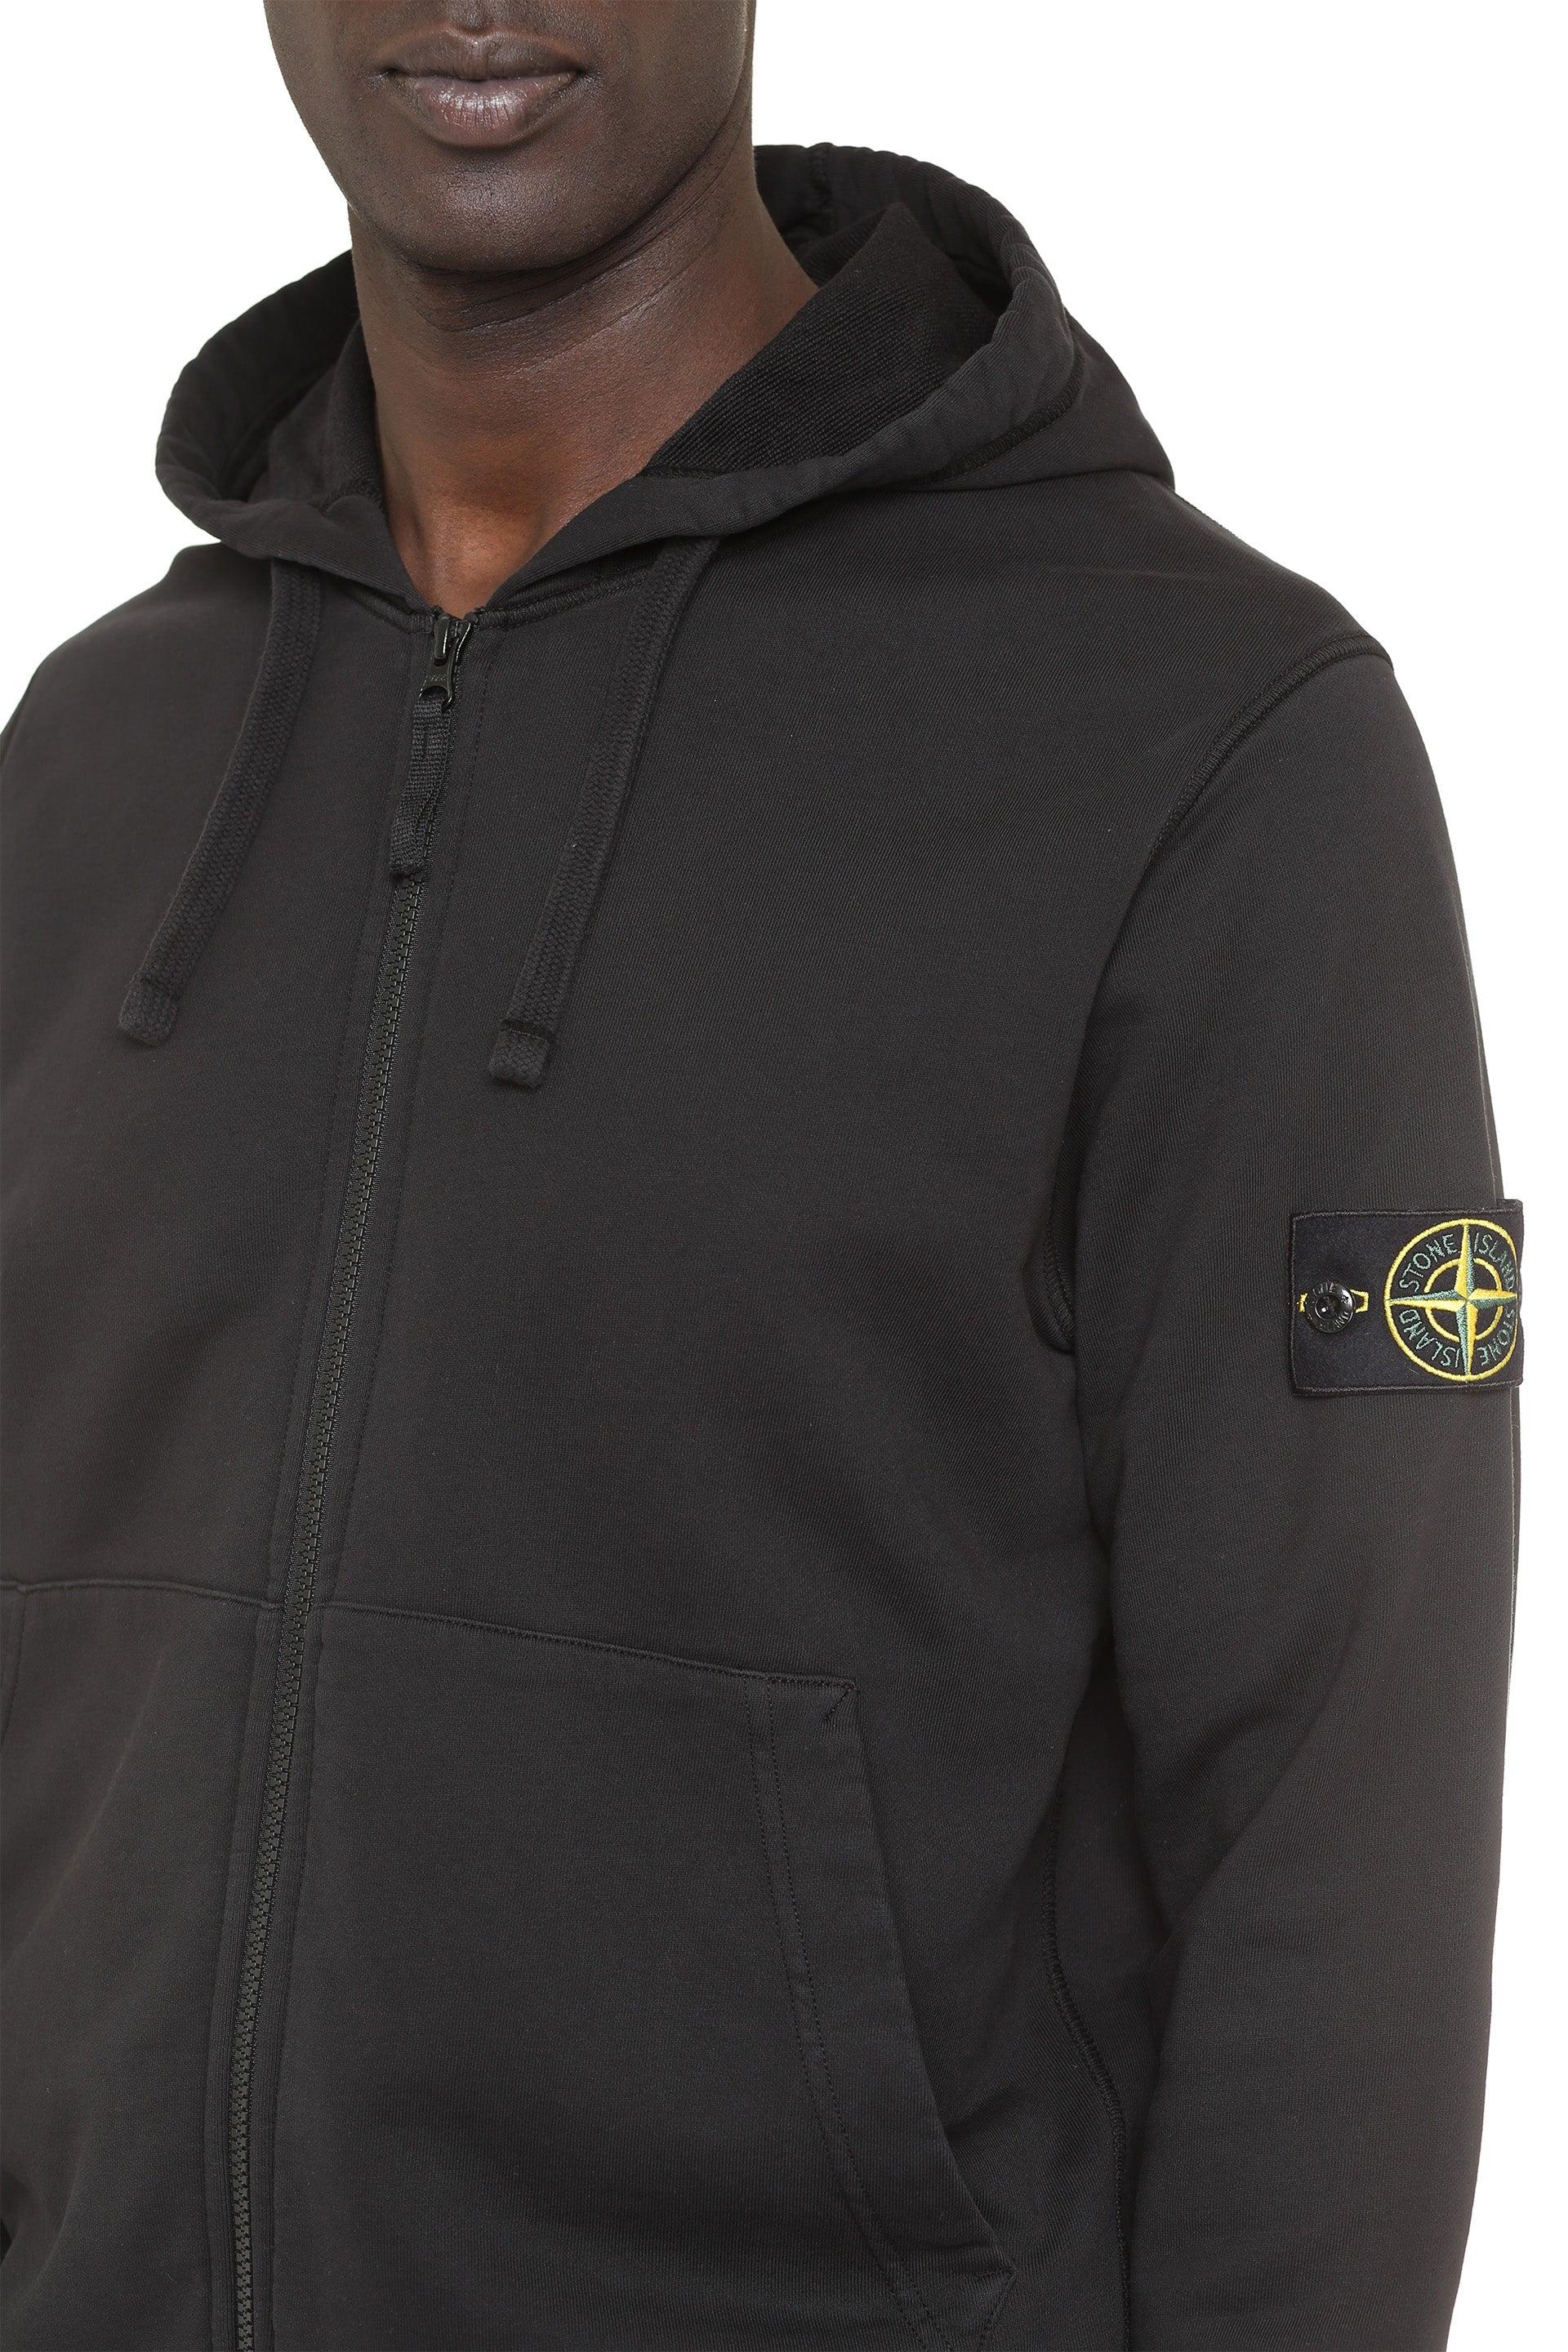 Stone Island Cotton Full Zip Hoodie in Black for Men - Save 22% - Lyst